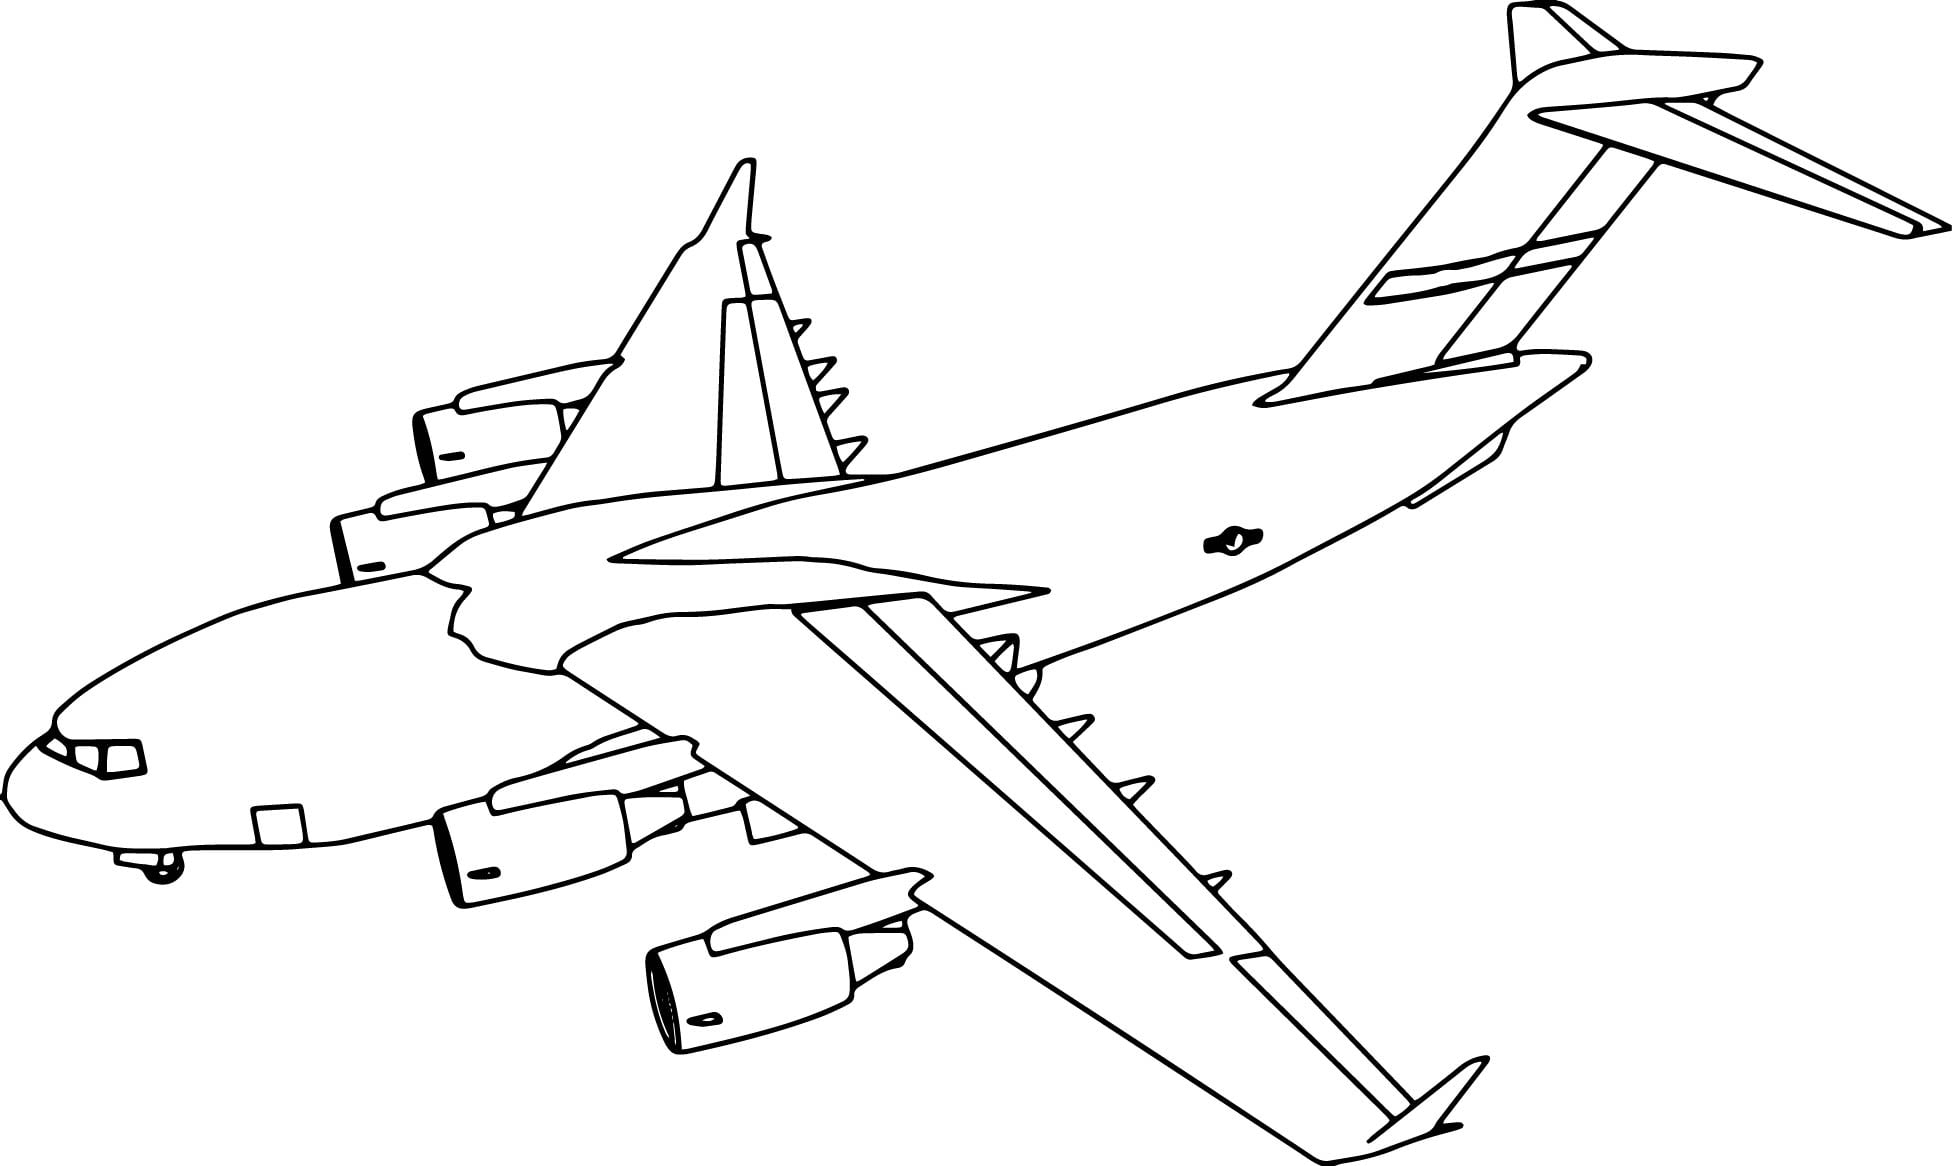 coloring pages of airplanes